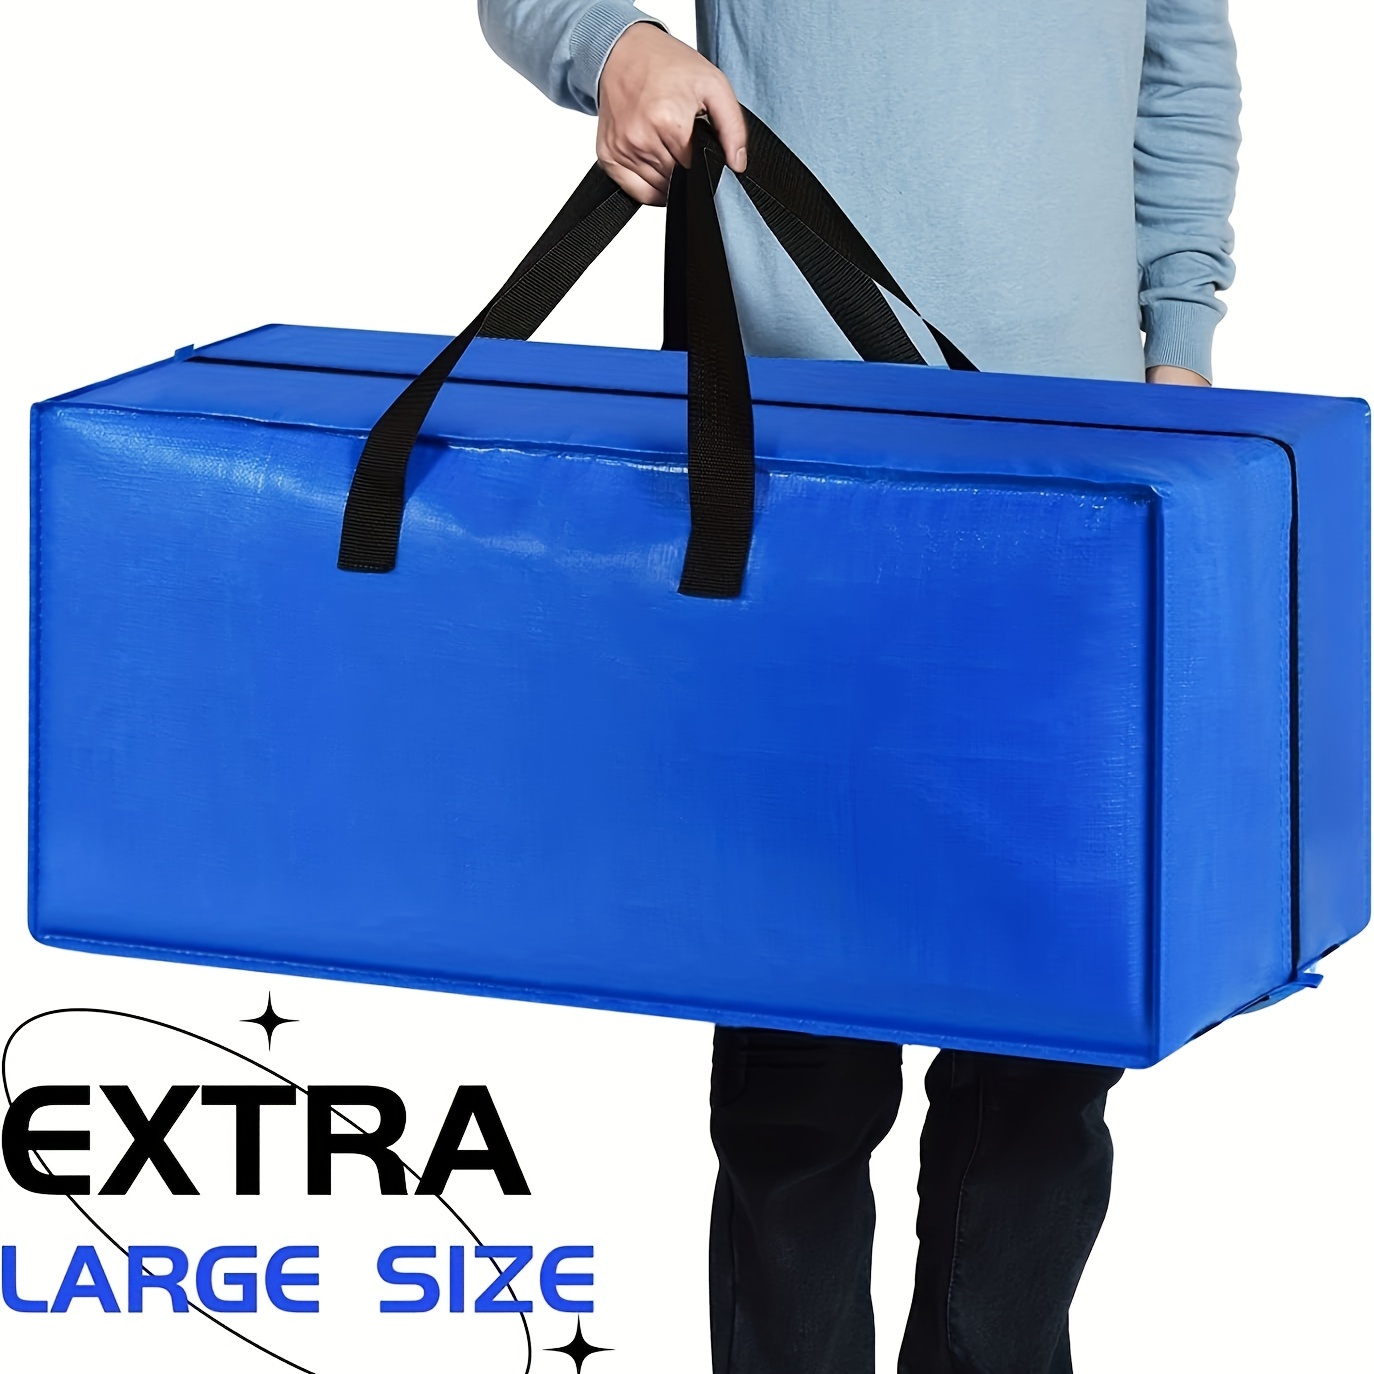 Acnusik Heavy Duty Extra Large Storage Bags, XL Blue Moving